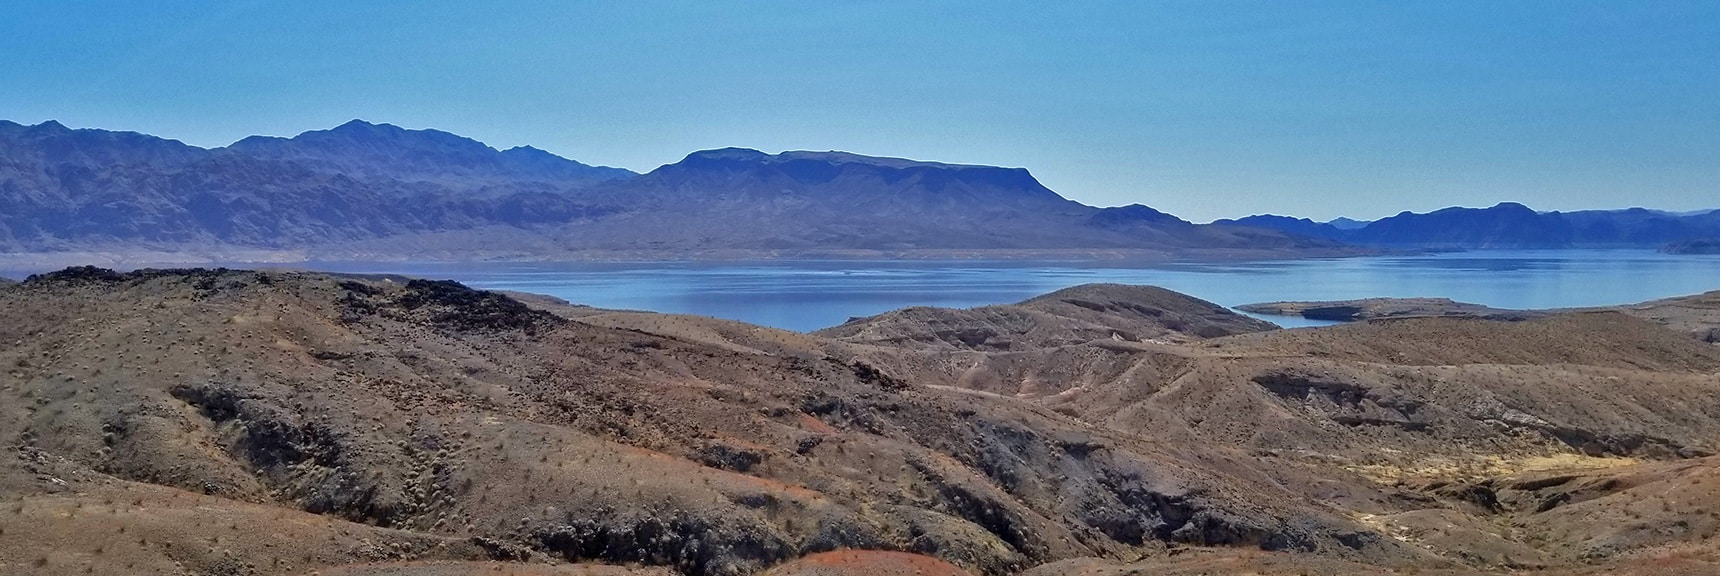 Black Mountains, Fortification Hill and Lake Mead from Callville Summit Area | Callville Summit Trail | Lake Mead National Recreation Area, Nevada